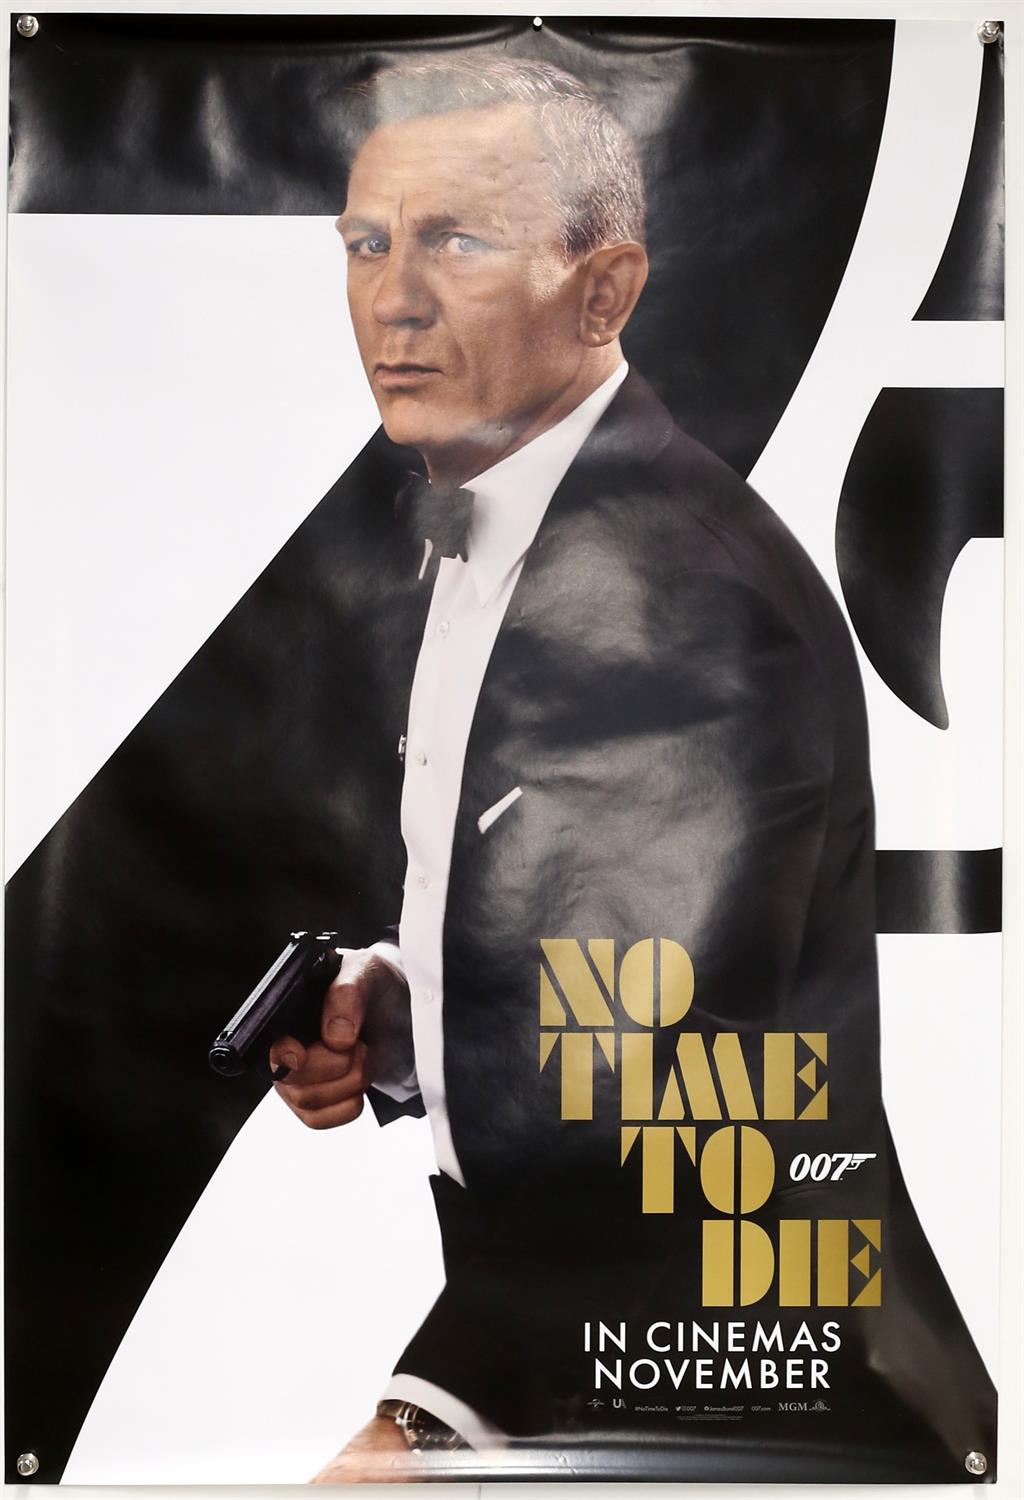 James Bond No Time To Die - US One sheet film poster, rolled, 27 x 41 inches.